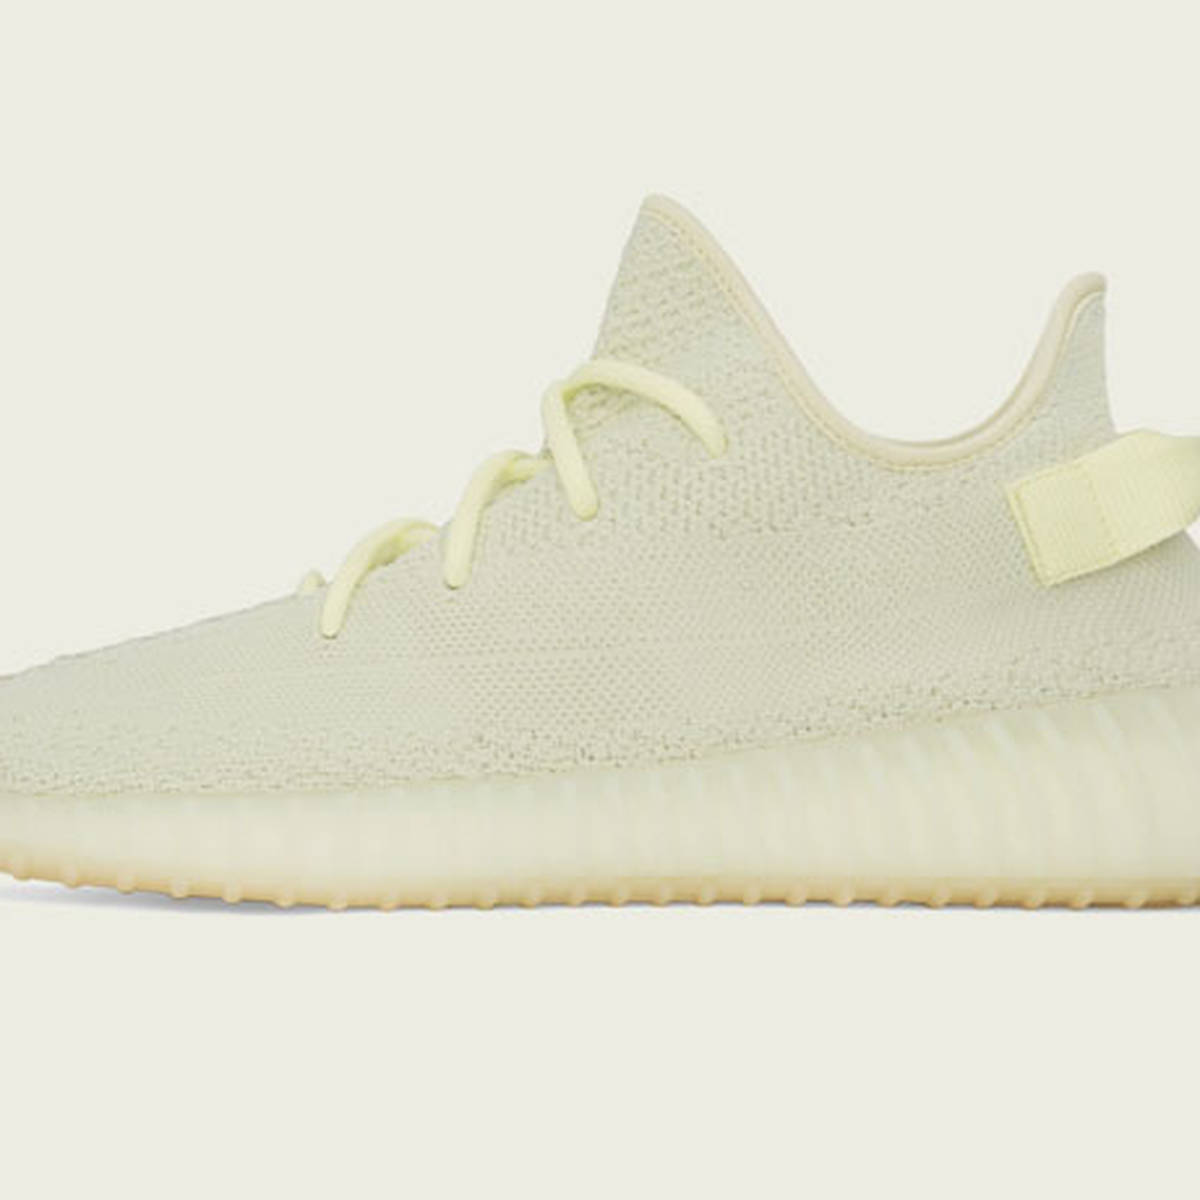 Yeezy Boost 350 V2 'Butter': What They Cost And Where To Buy 